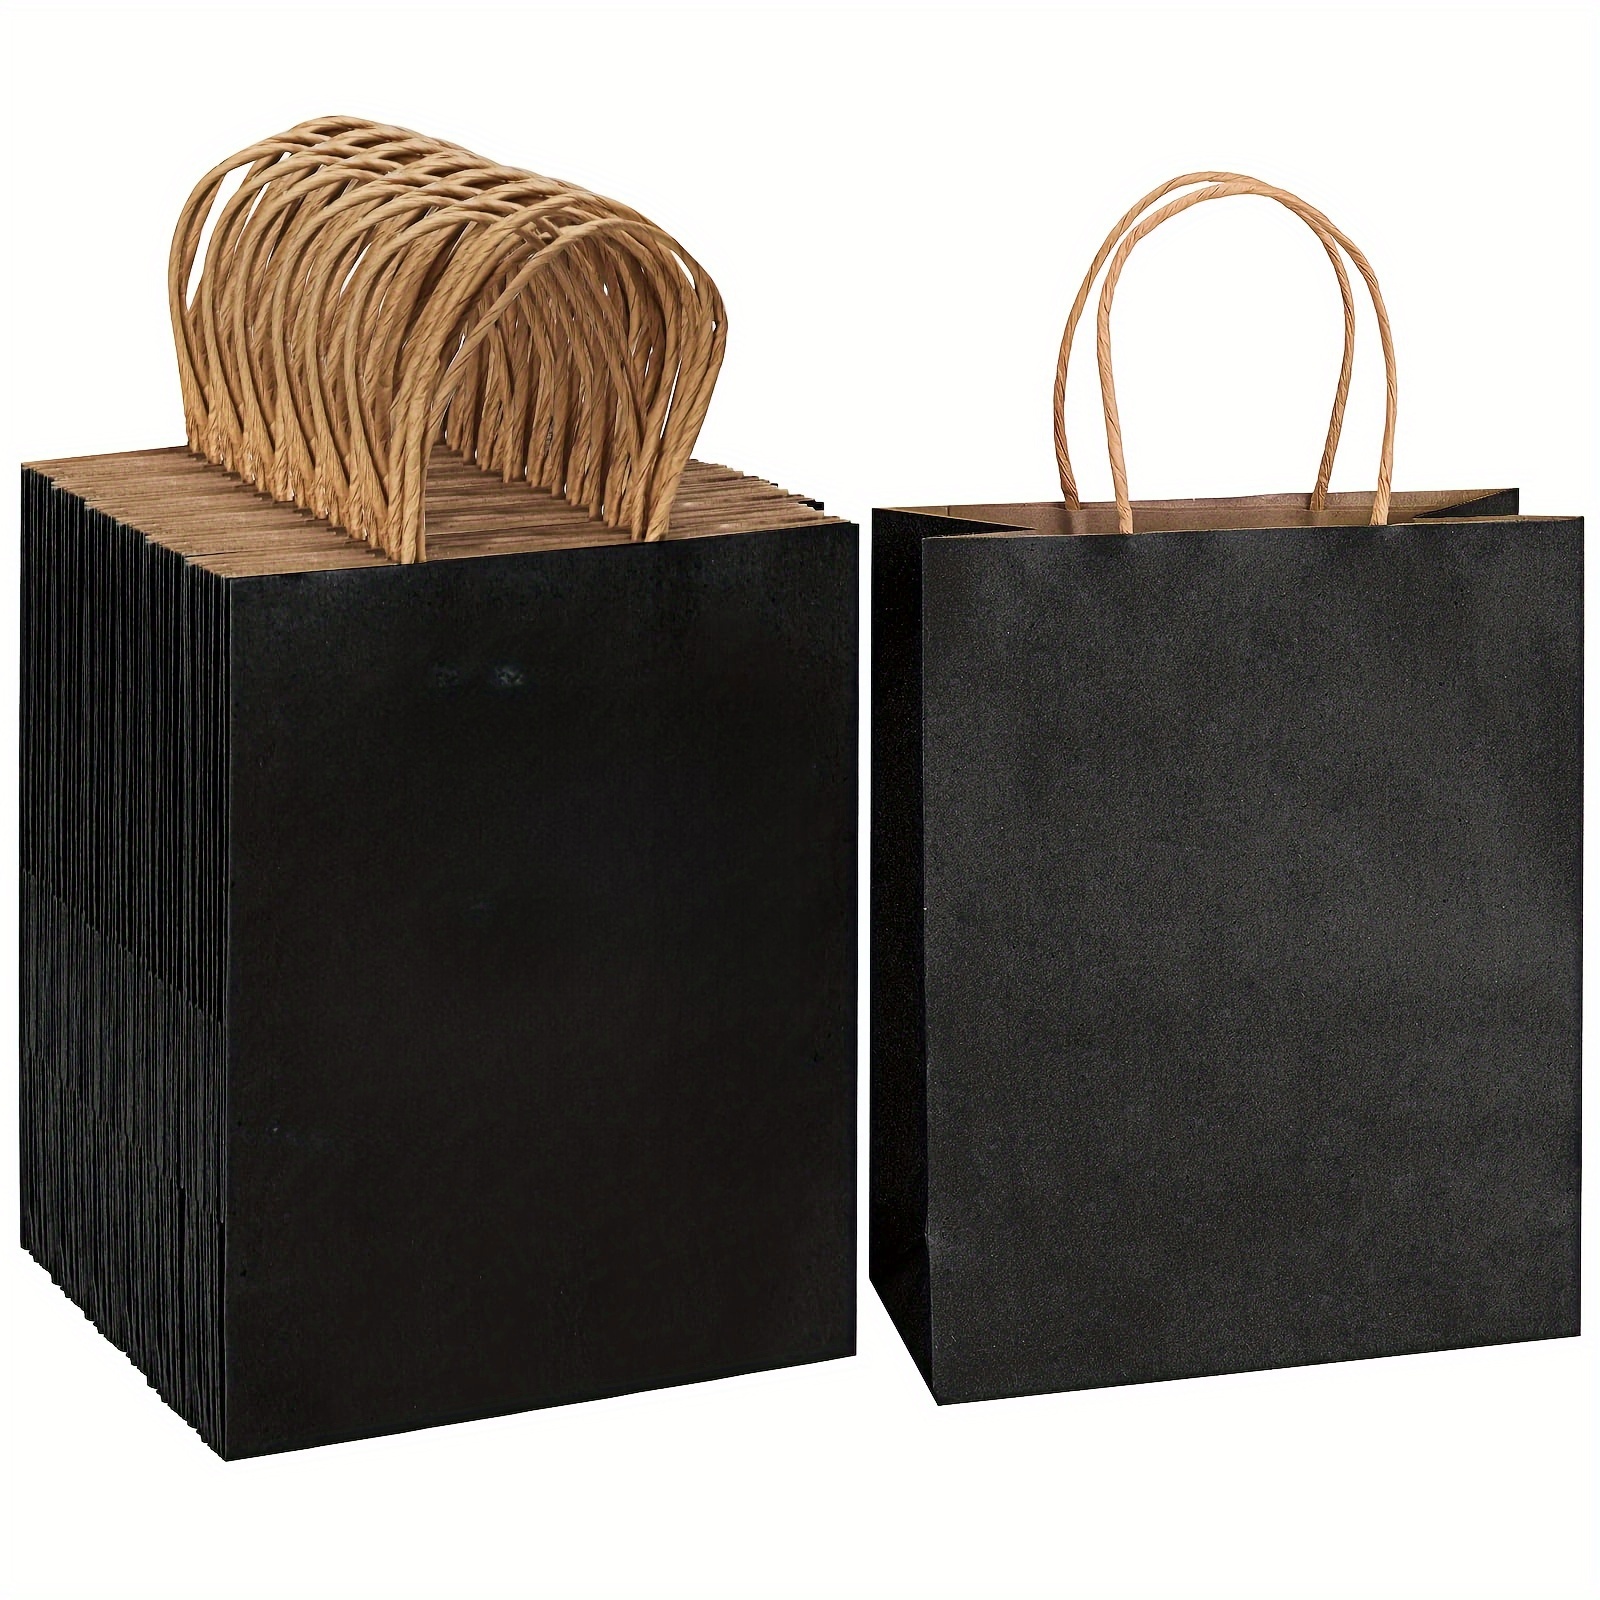 20Pcs Small Gift Bags Colored Kraft Paper Bags with Handles Large Craft  Totes in Bulk for Boutiques Small Business Retail Stores